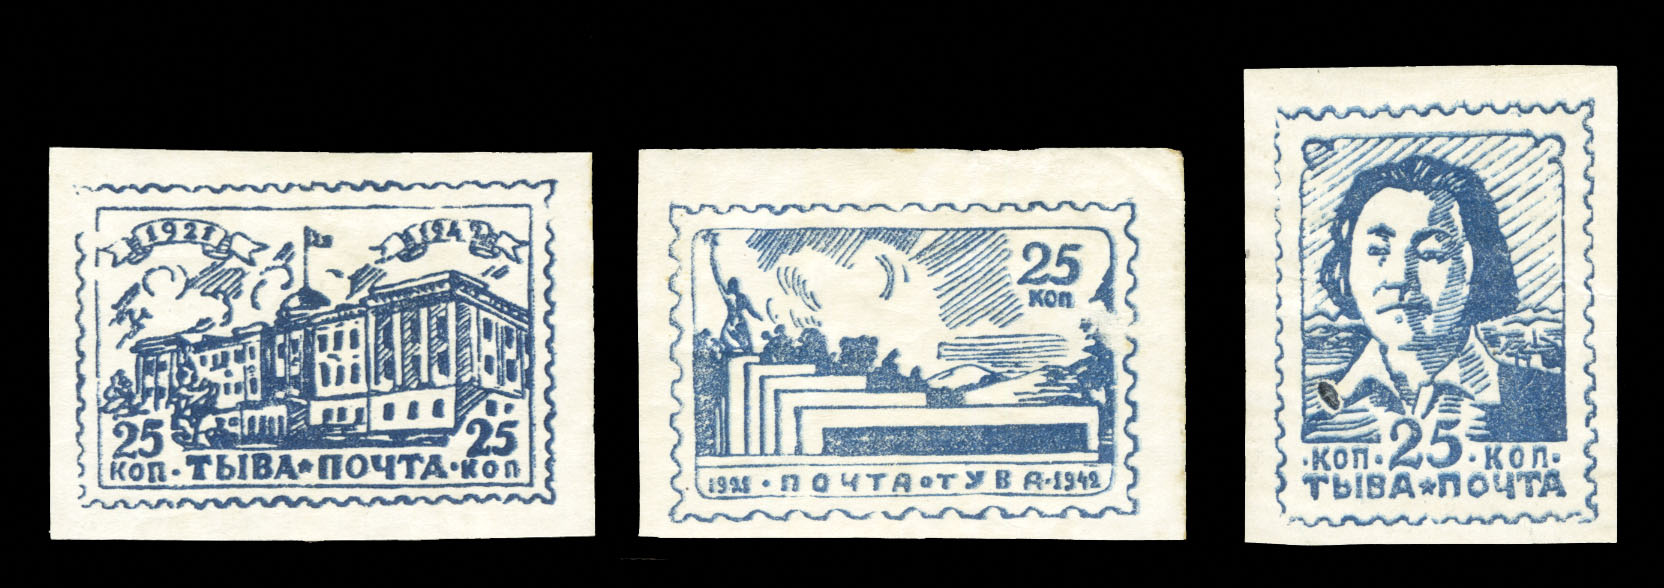 Lot 1328 - Ethiopia  -  Cherrystone Auctions Rare Stamps & Postal History of the World